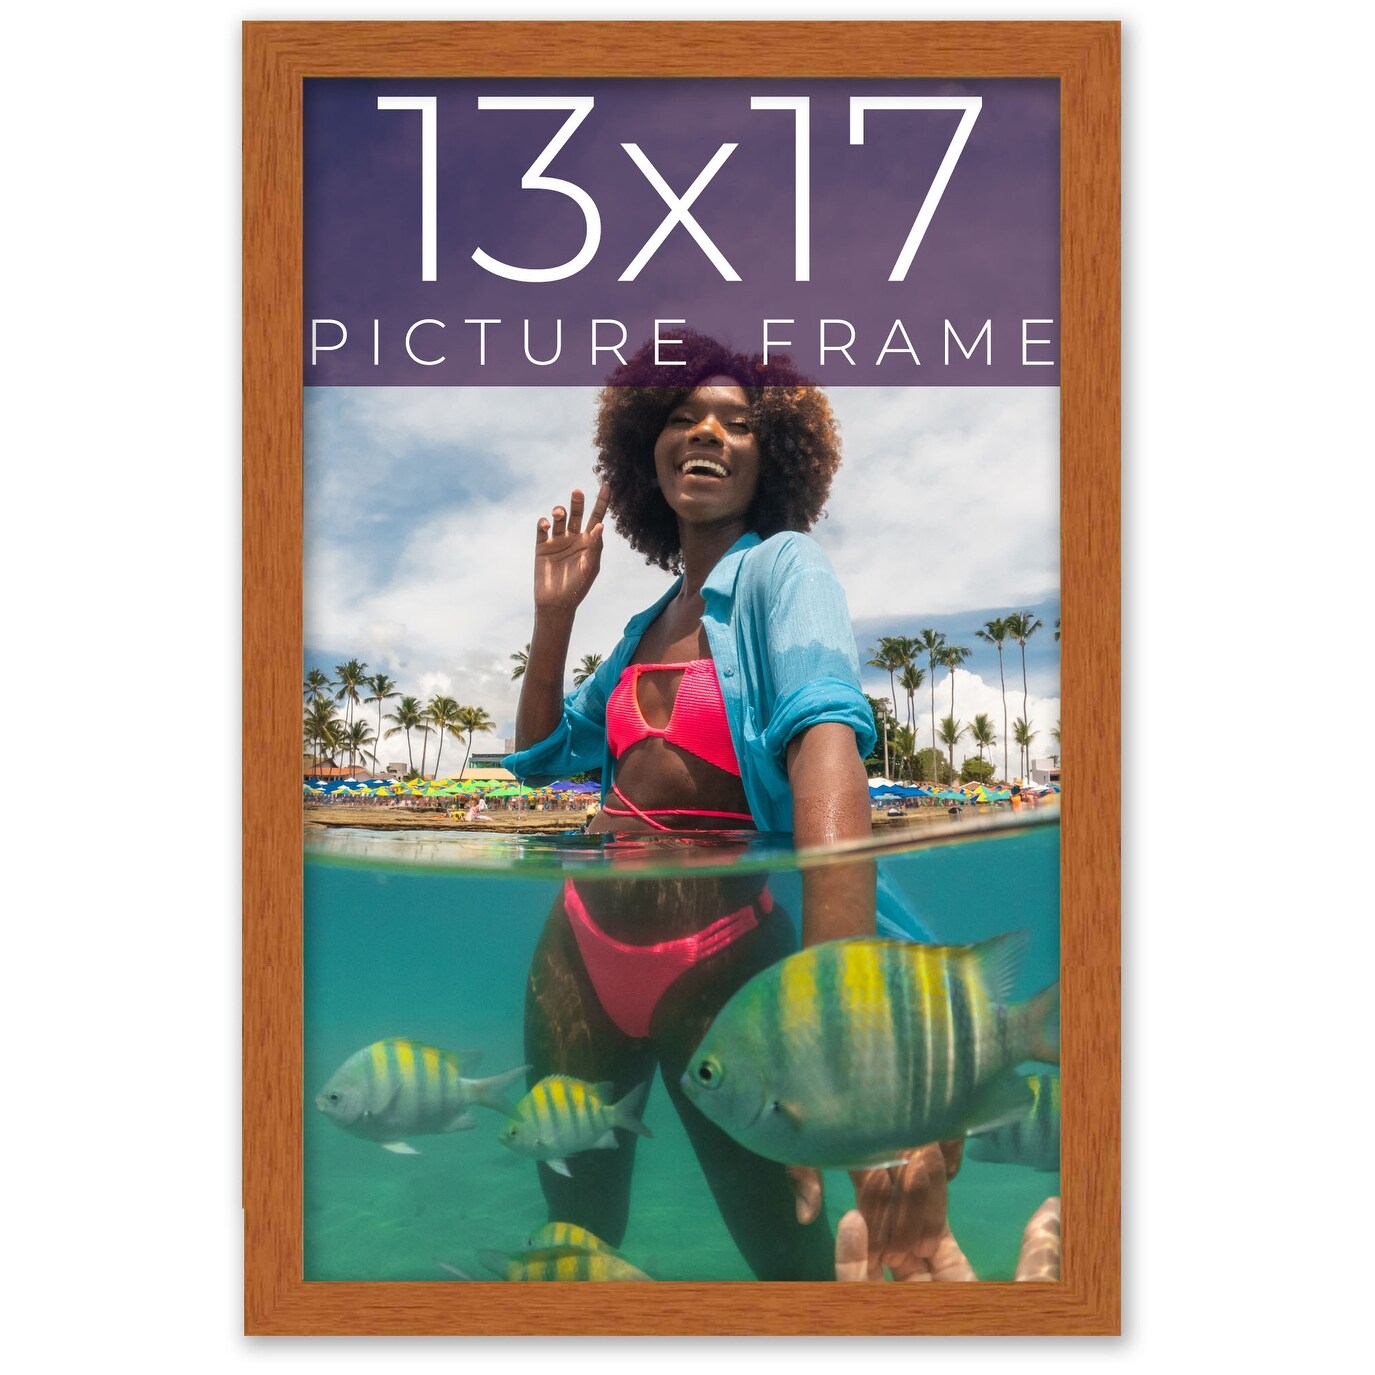 13x17 Picture Frame - Contemporary Picture Frame Complete With UV